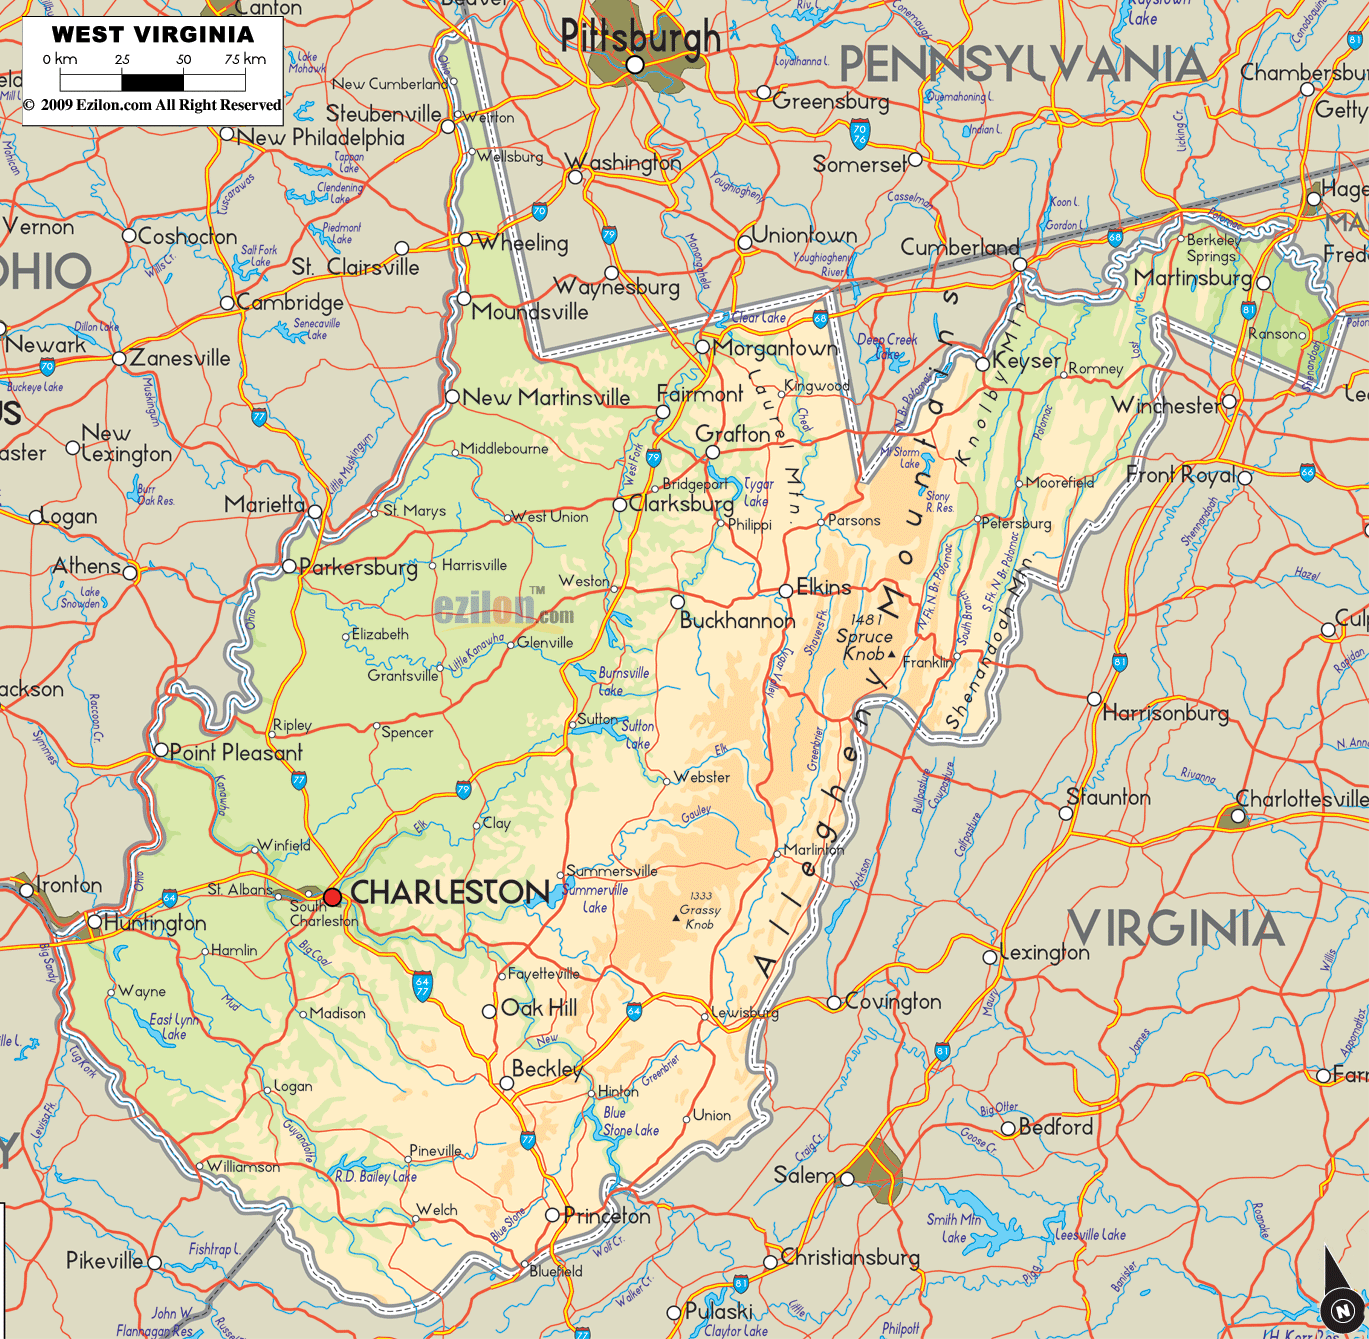 Detailed physical map of West Virginia showing major geographical features such as rivers, lakes, topography and land formations.